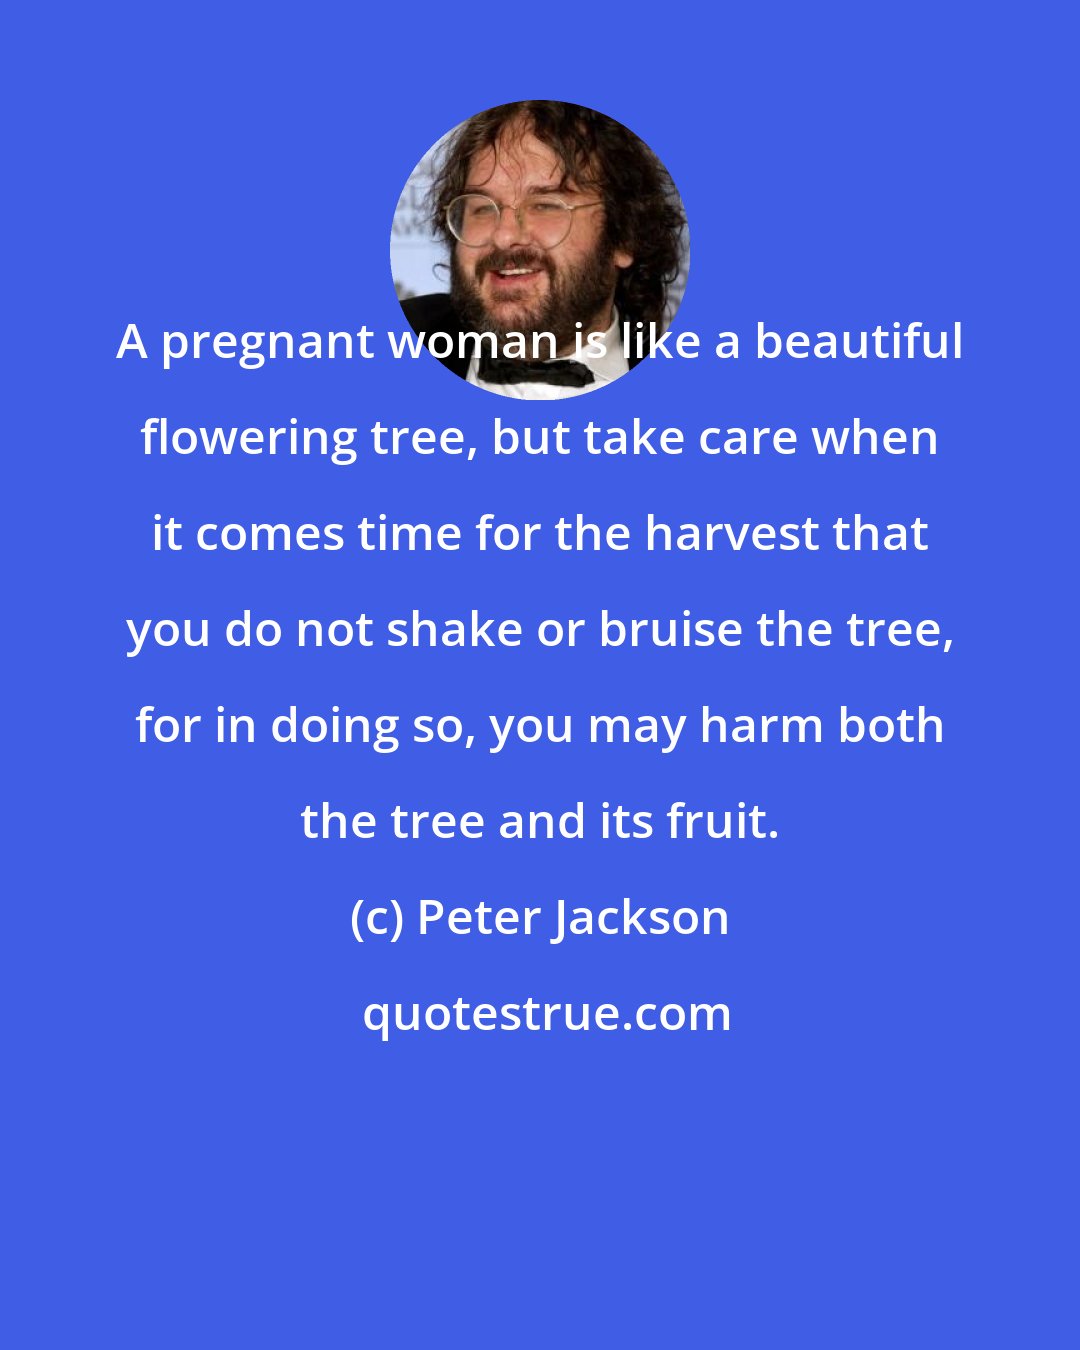 Peter Jackson: A pregnant woman is like a beautiful flowering tree, but take care when it comes time for the harvest that you do not shake or bruise the tree, for in doing so, you may harm both the tree and its fruit.